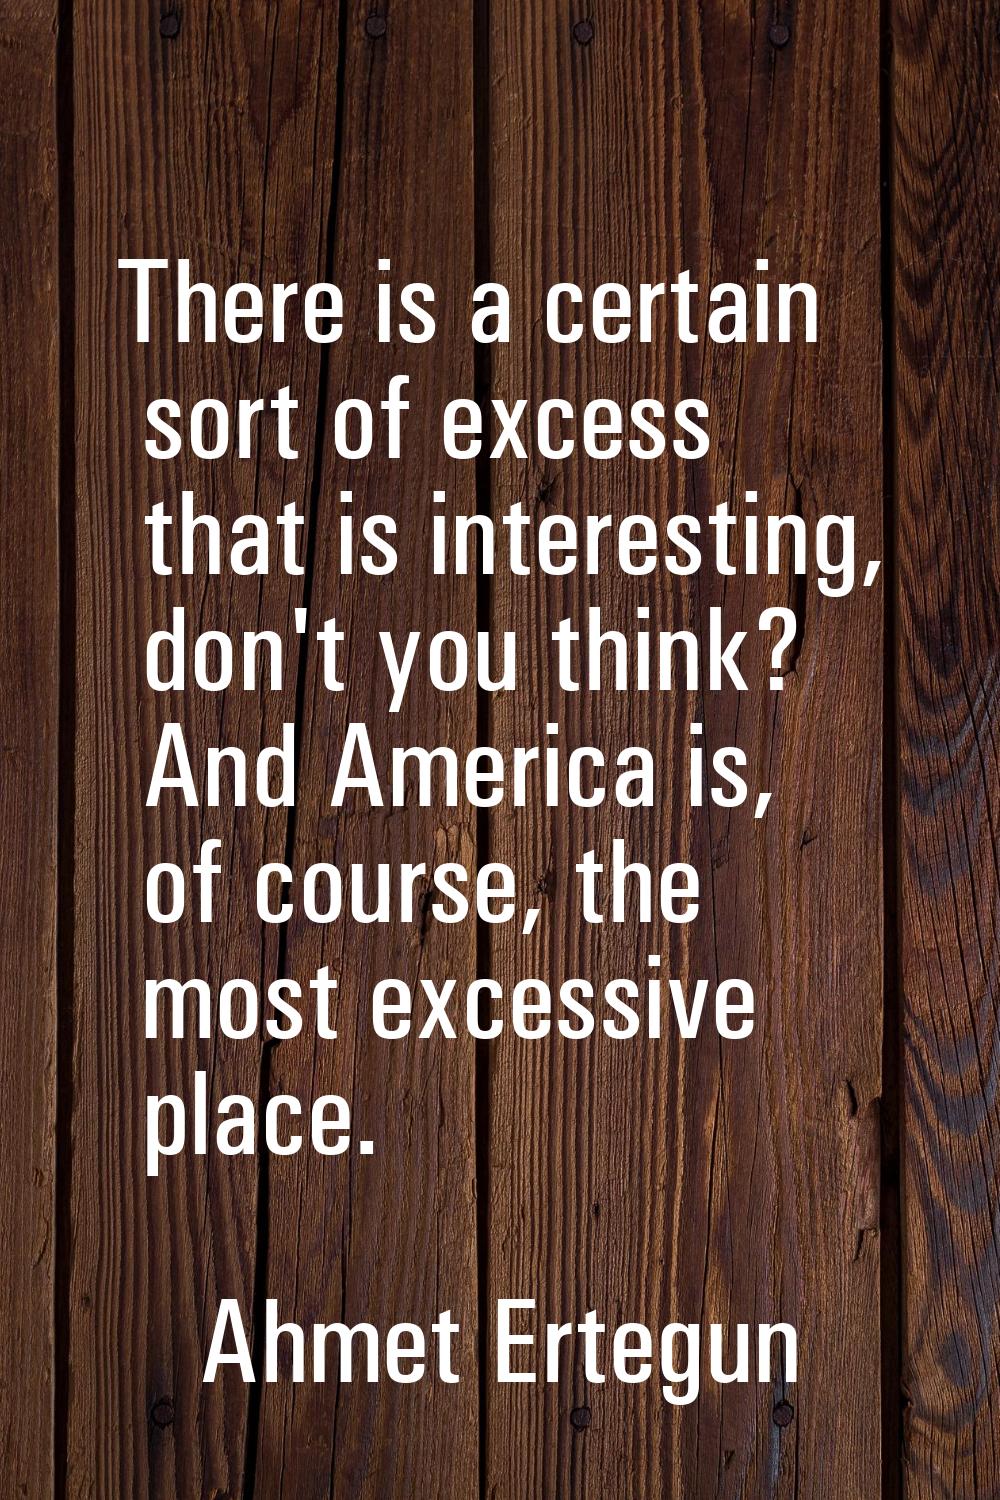 There is a certain sort of excess that is interesting, don't you think? And America is, of course, 